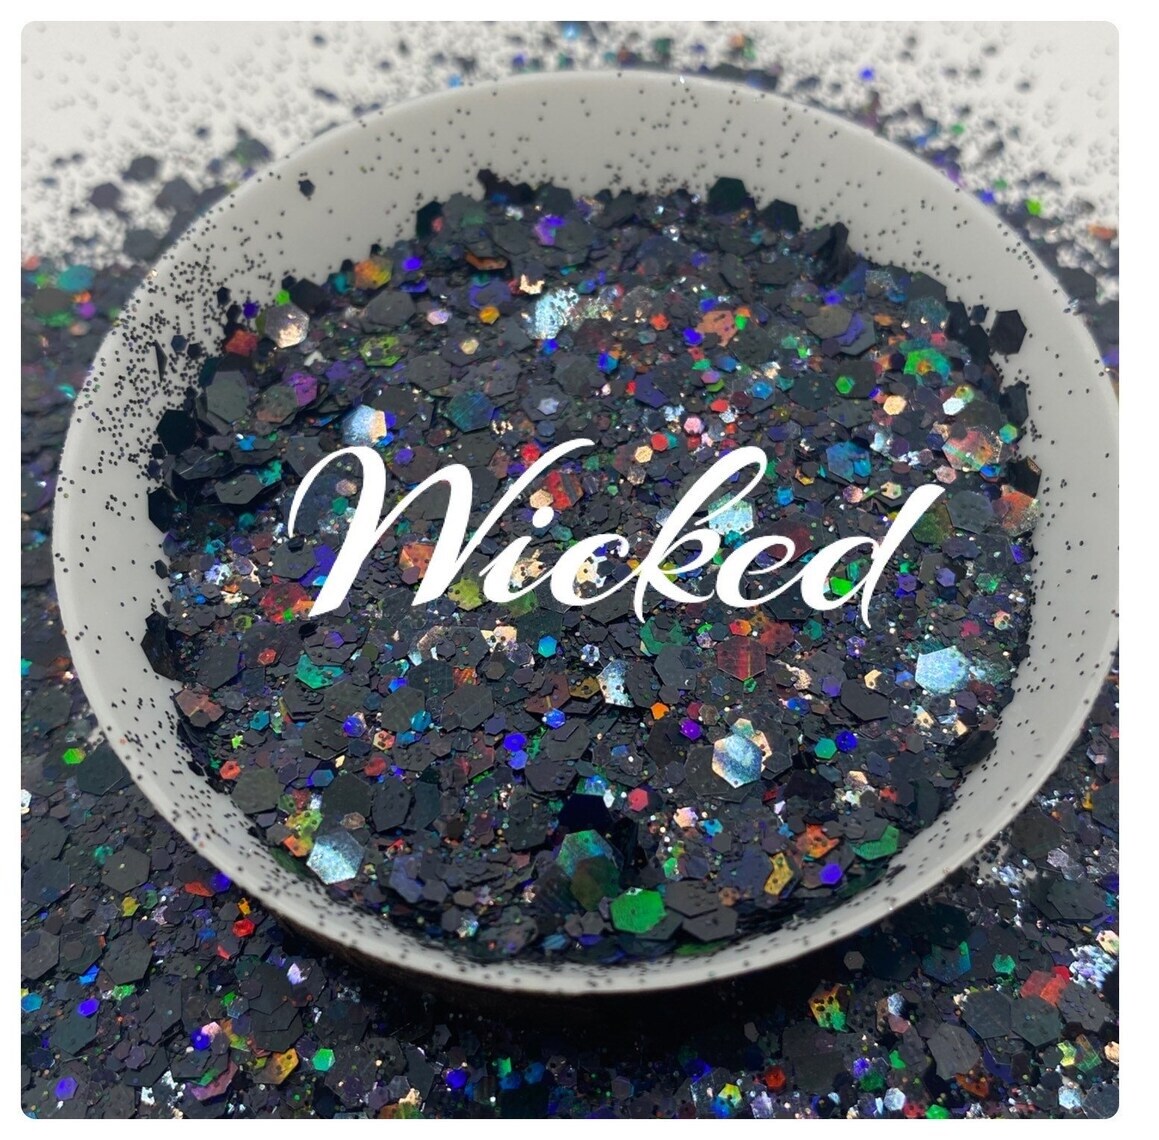 Wicked: Holographic chunky glitter 1oz